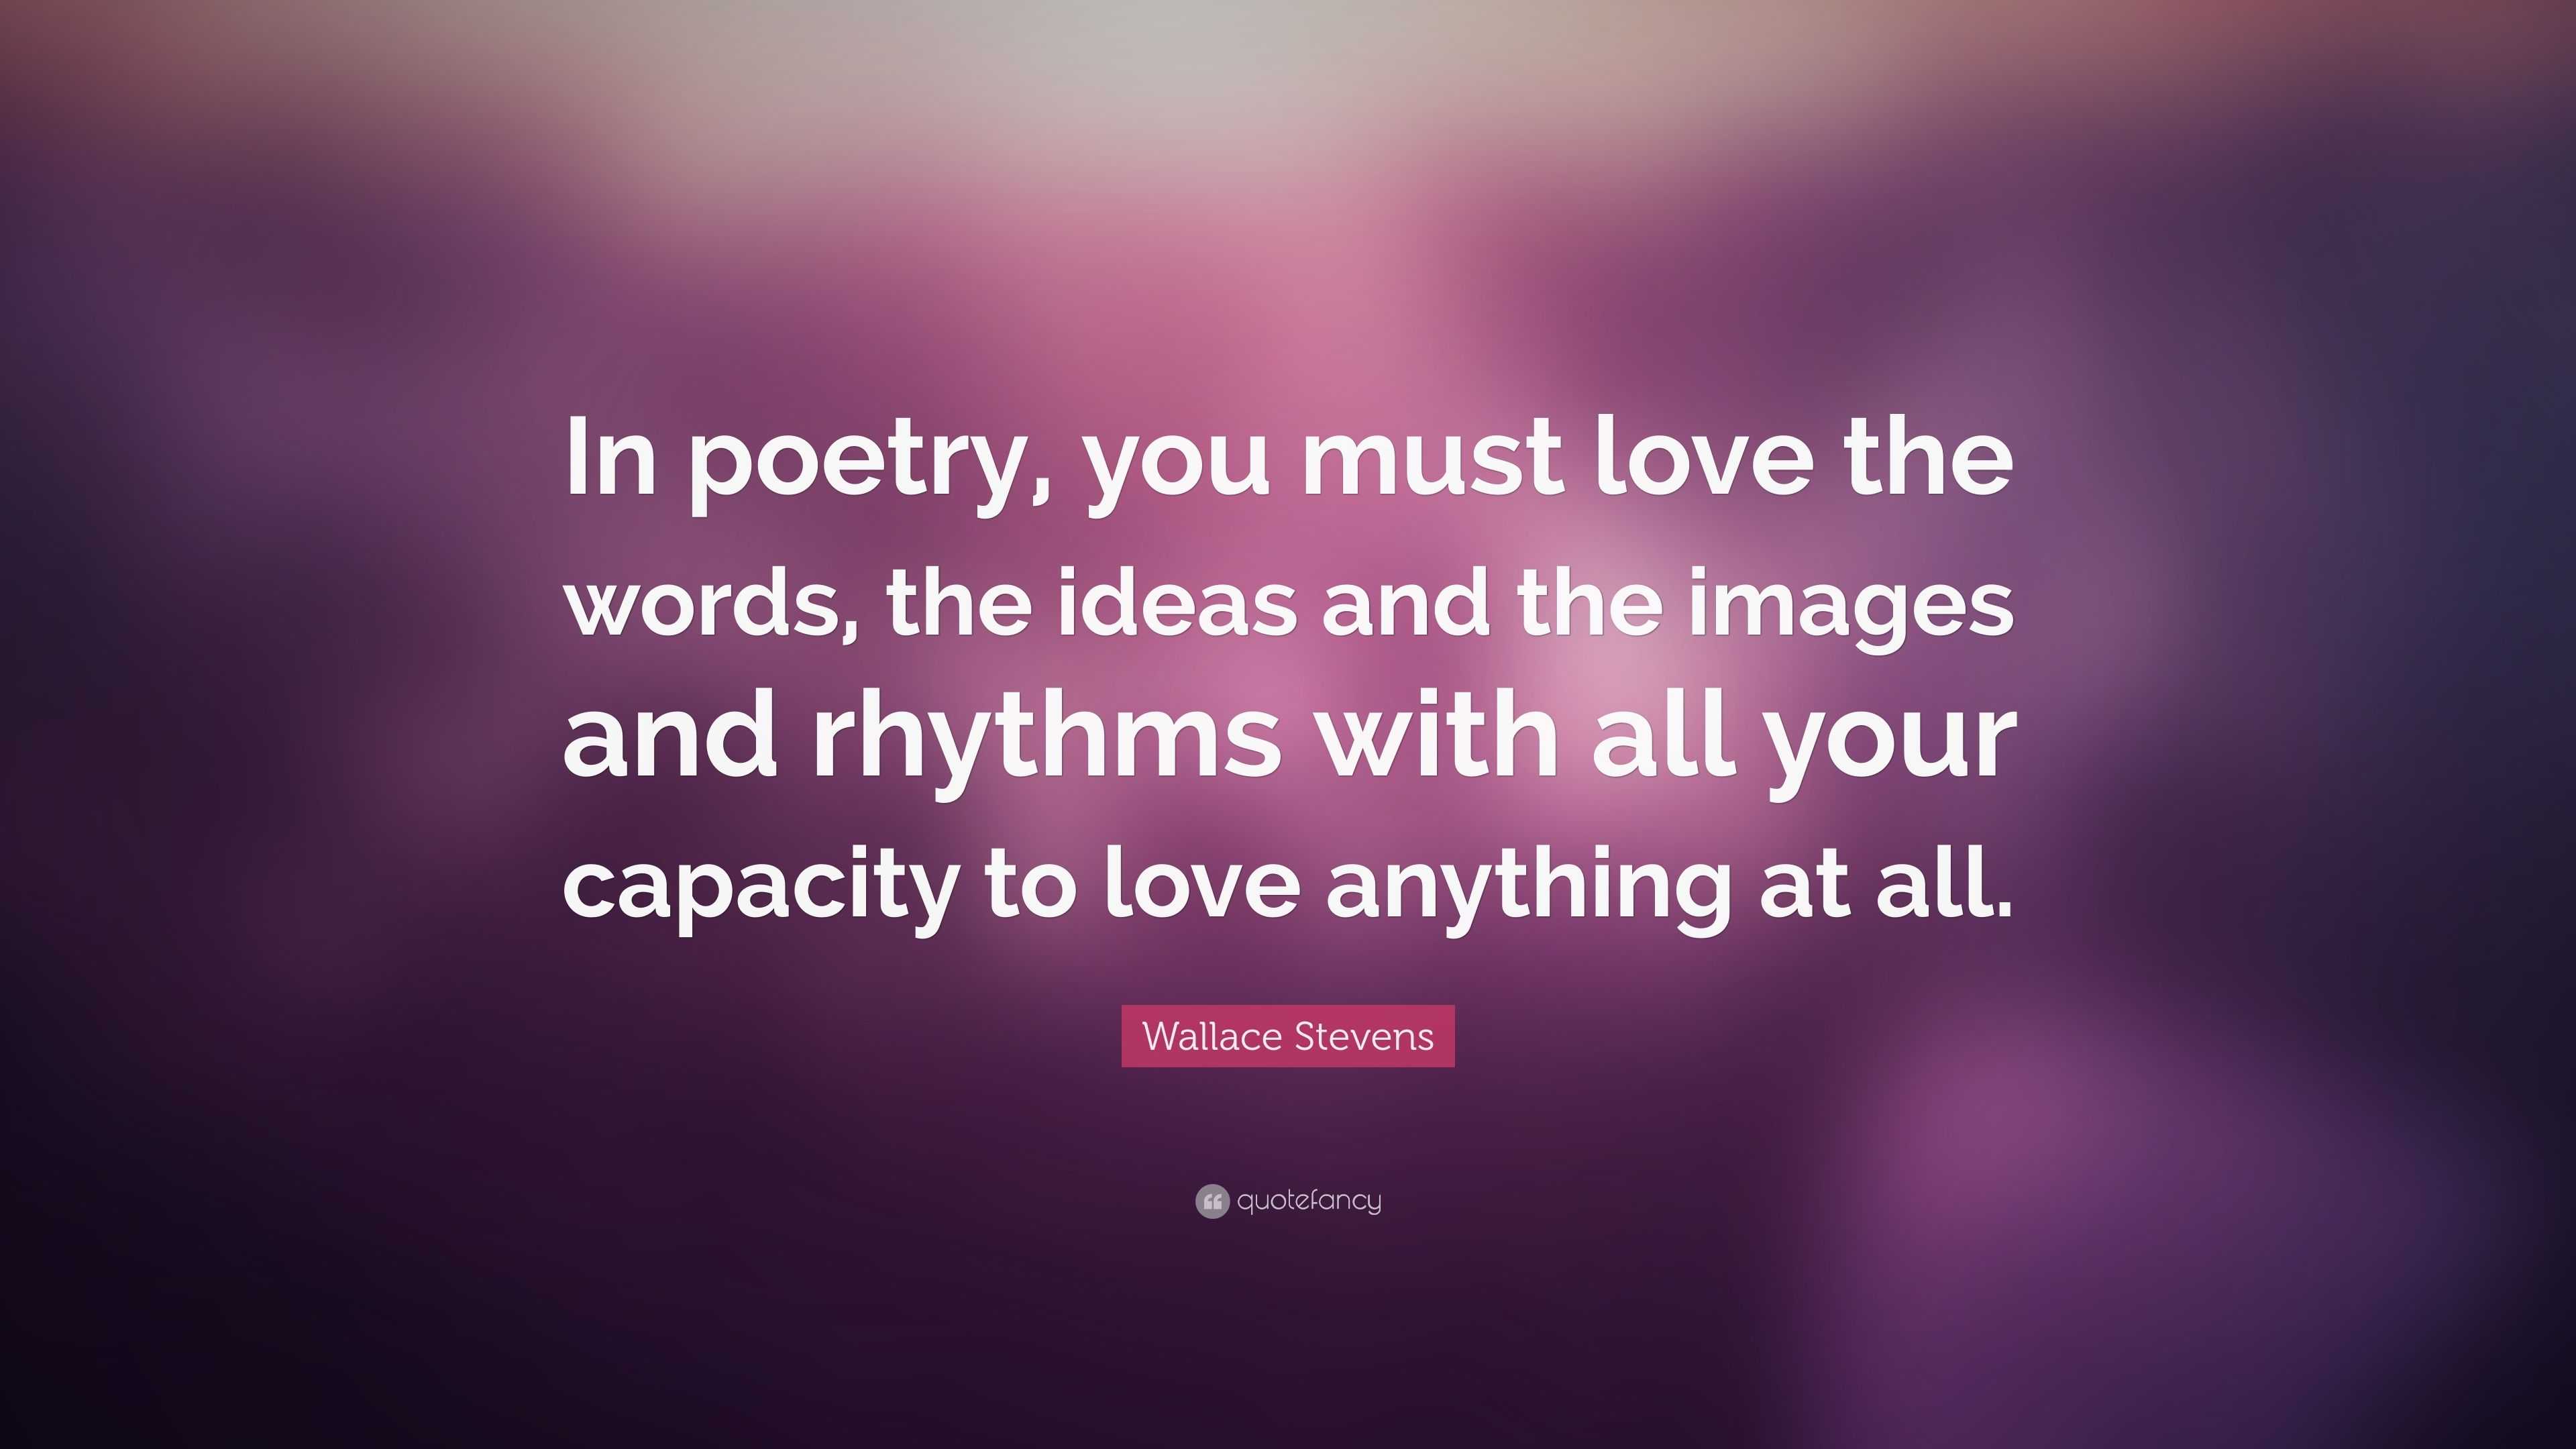 Wallace Stevens Quote: “In poetry, you must love the words, the ideas ...